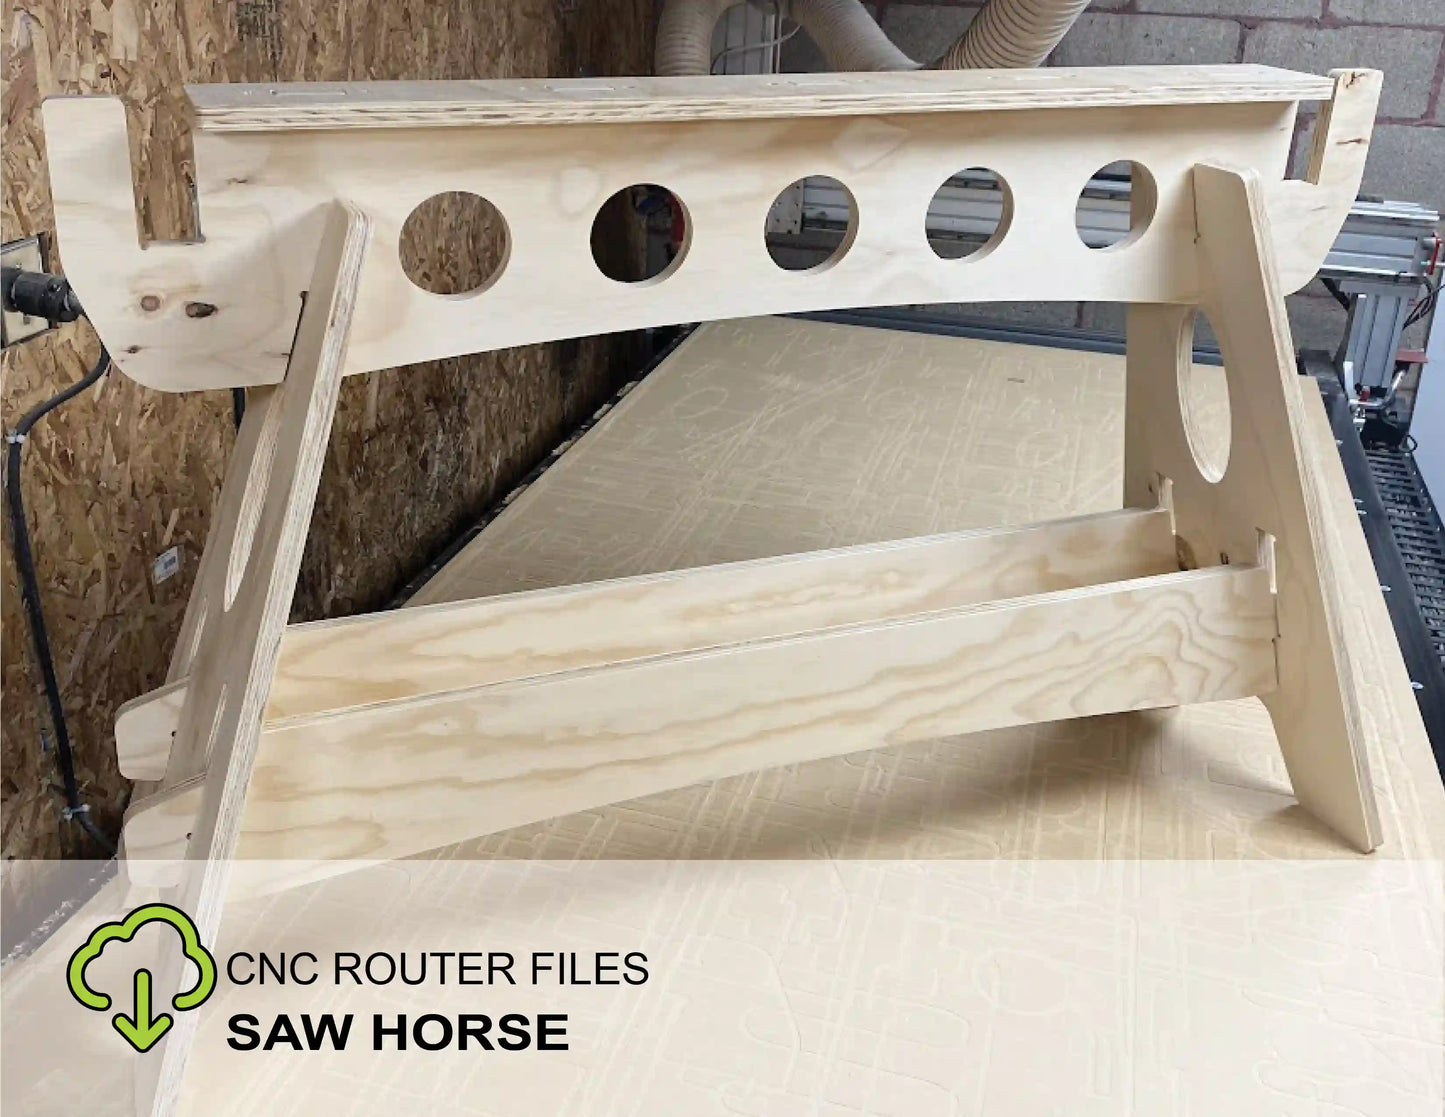 how to build a set of cnc sawhorses on a cnc router from cnc wood router files